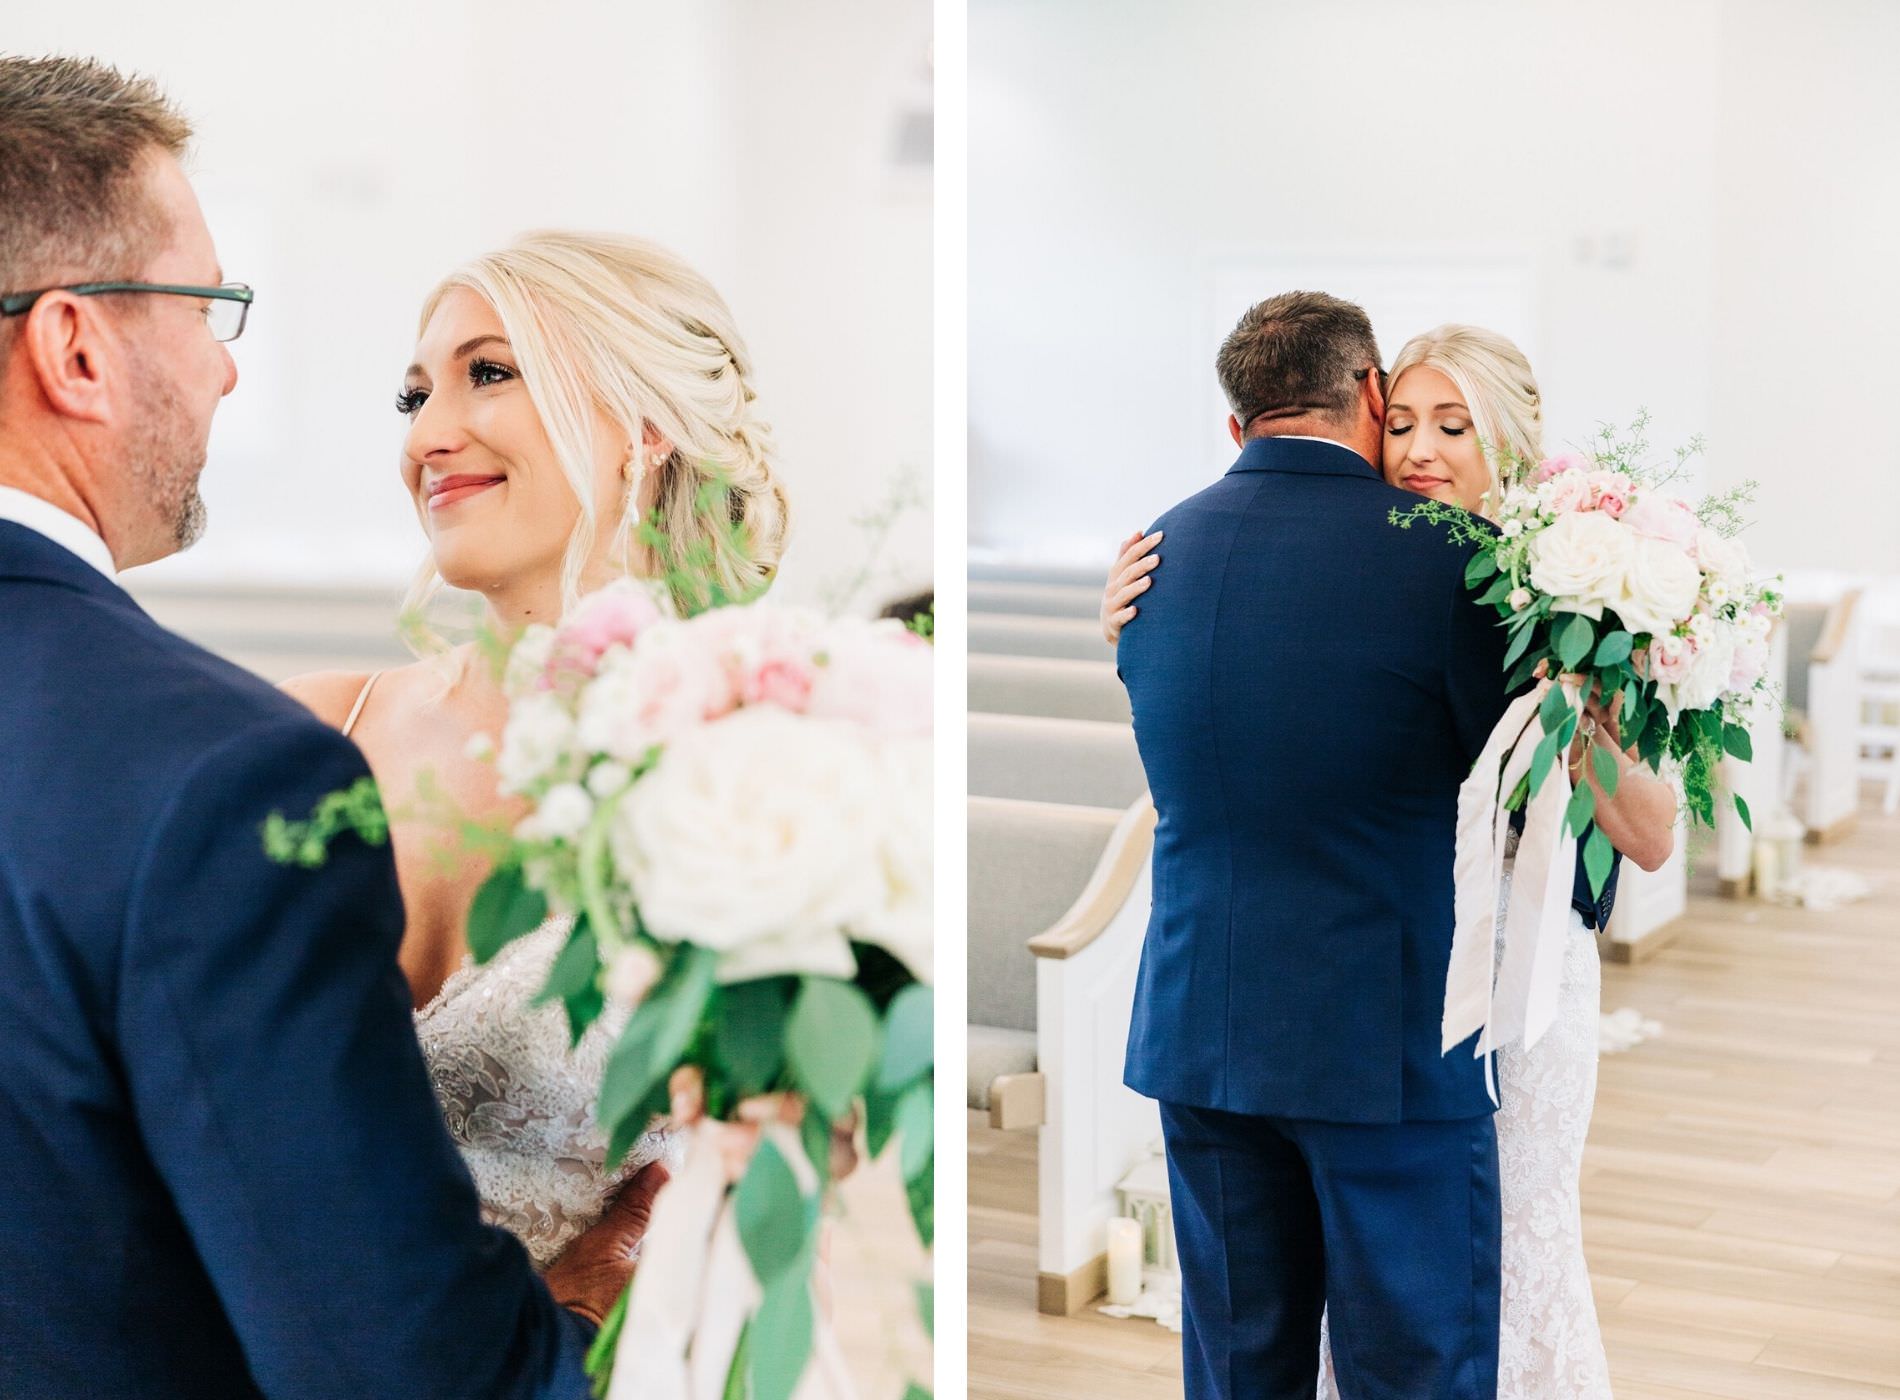 Bride and Dad First Look | Bridal Bouquet with White Hydrangea and Pink Roses with Cascading Ivy Greenery | Father Daughter First Look Wedding Portrait